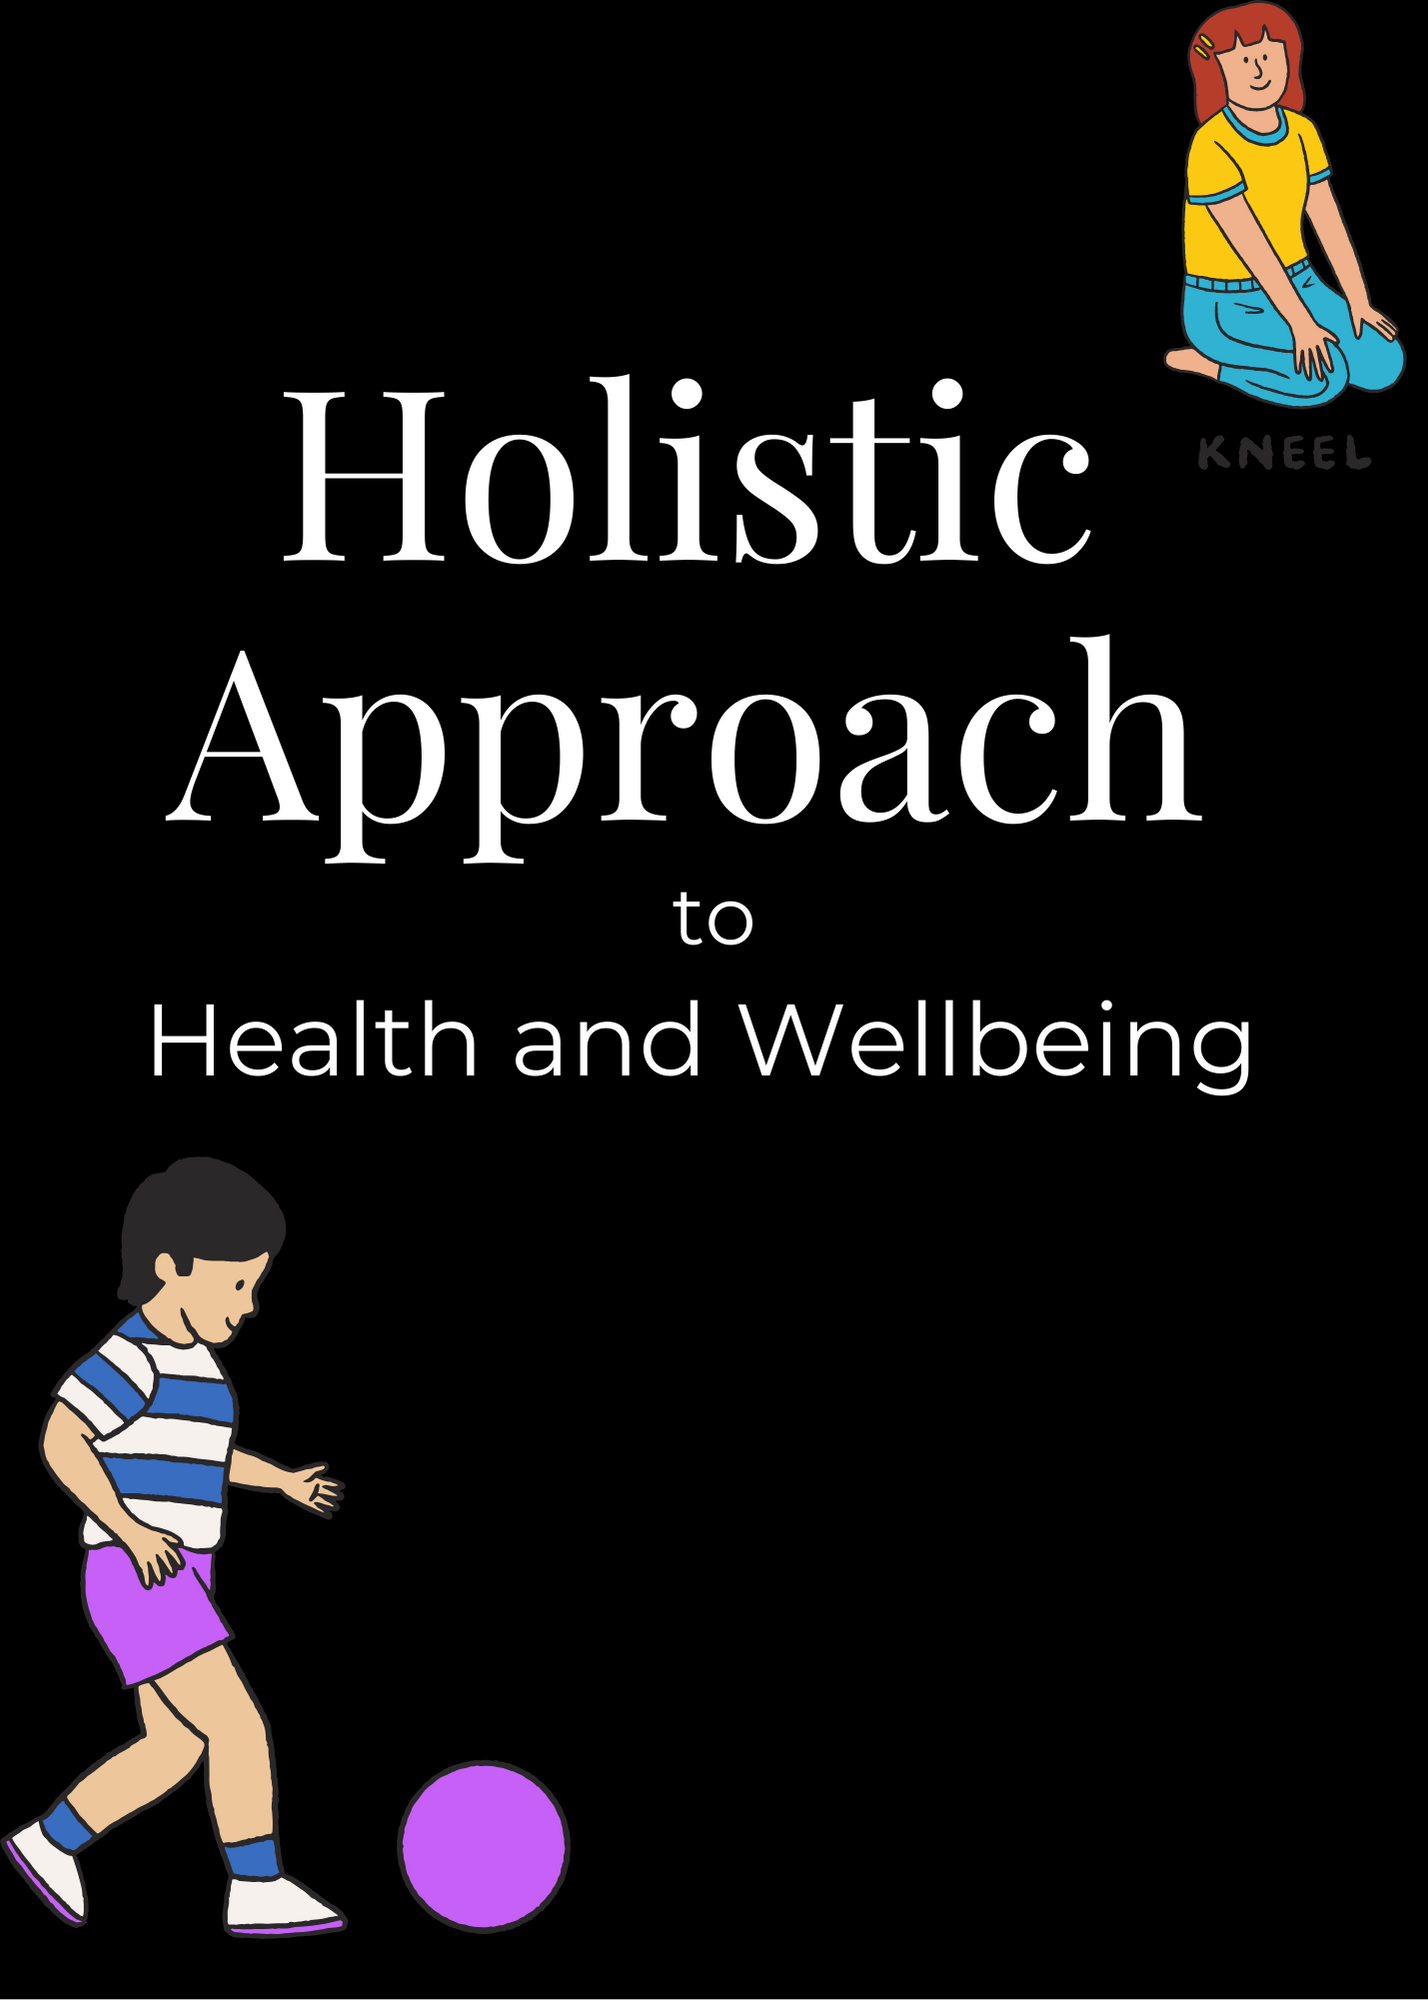 Holistic Approach to Health and Wellbeing